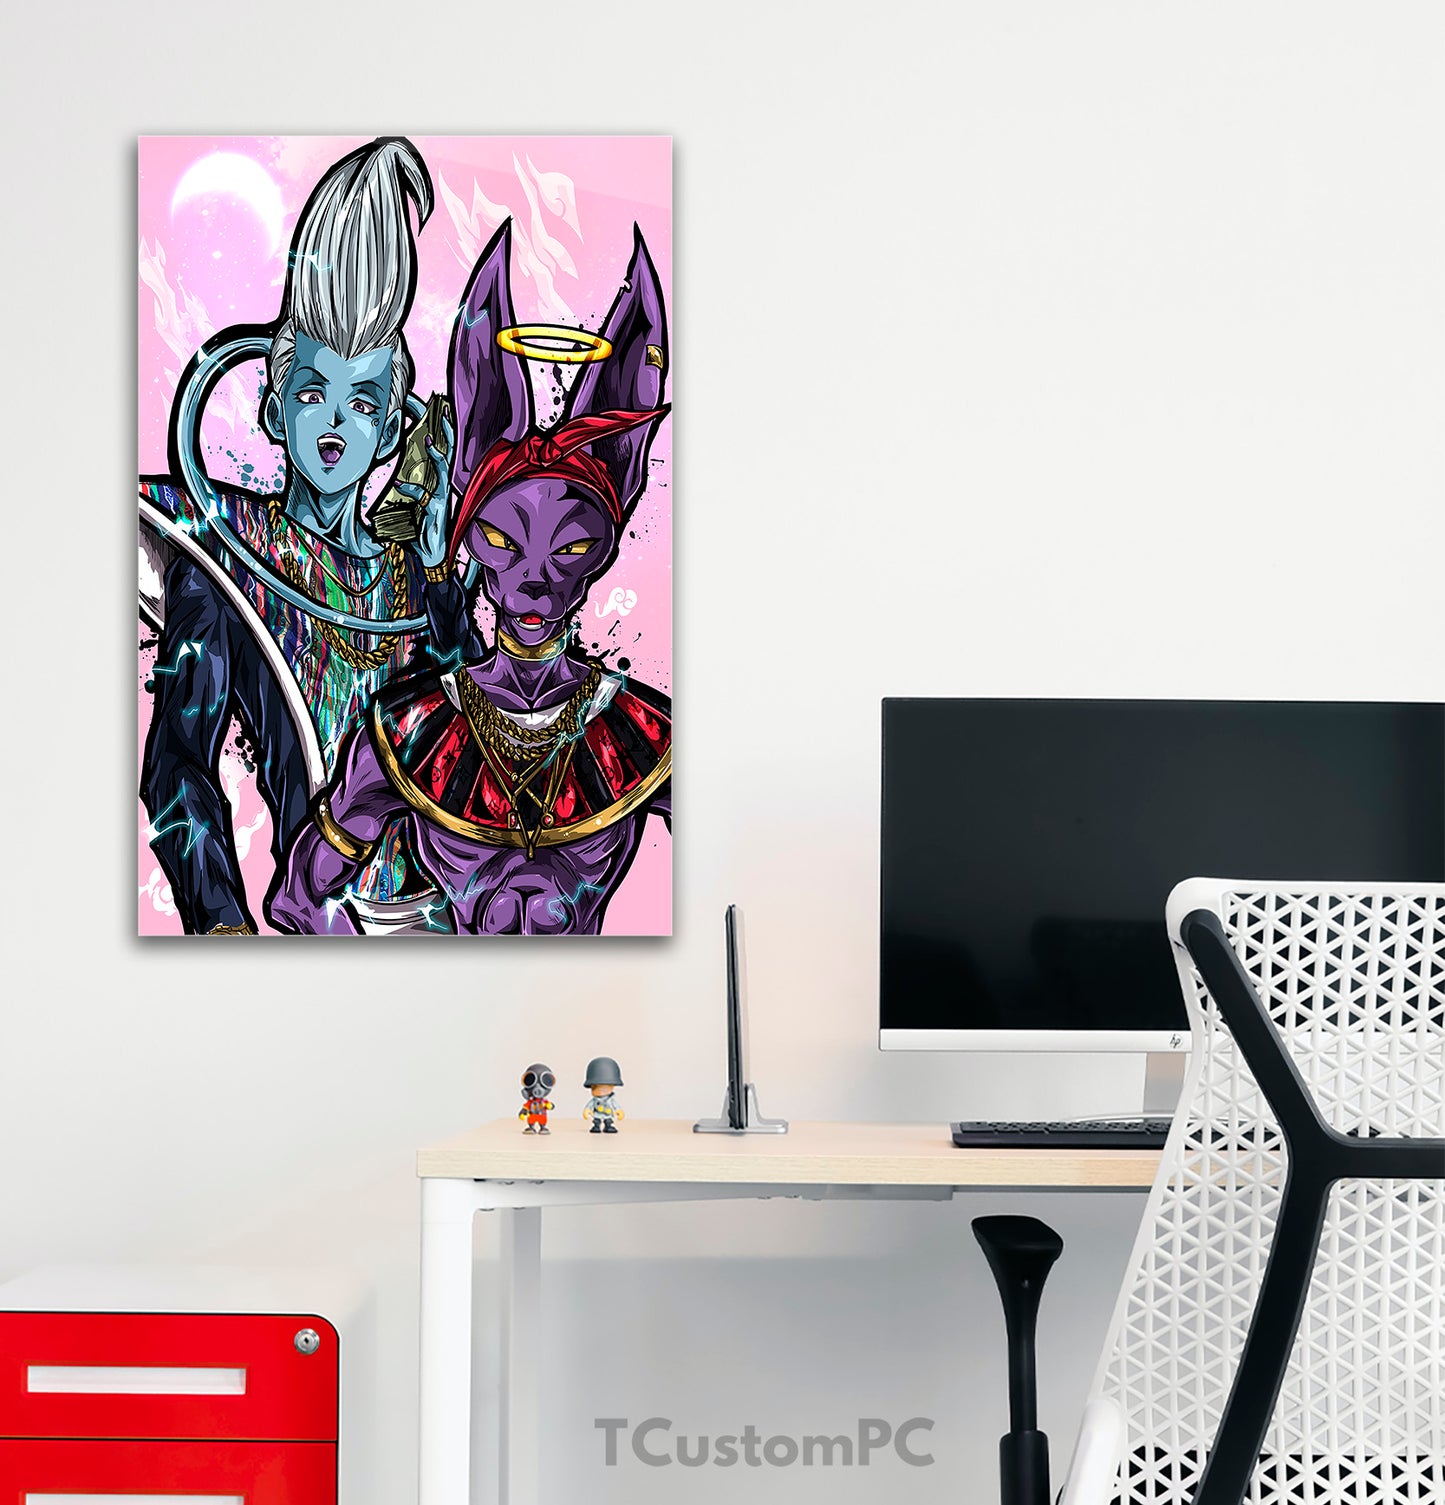 Painting Dragon Ball, Beerus X Whis